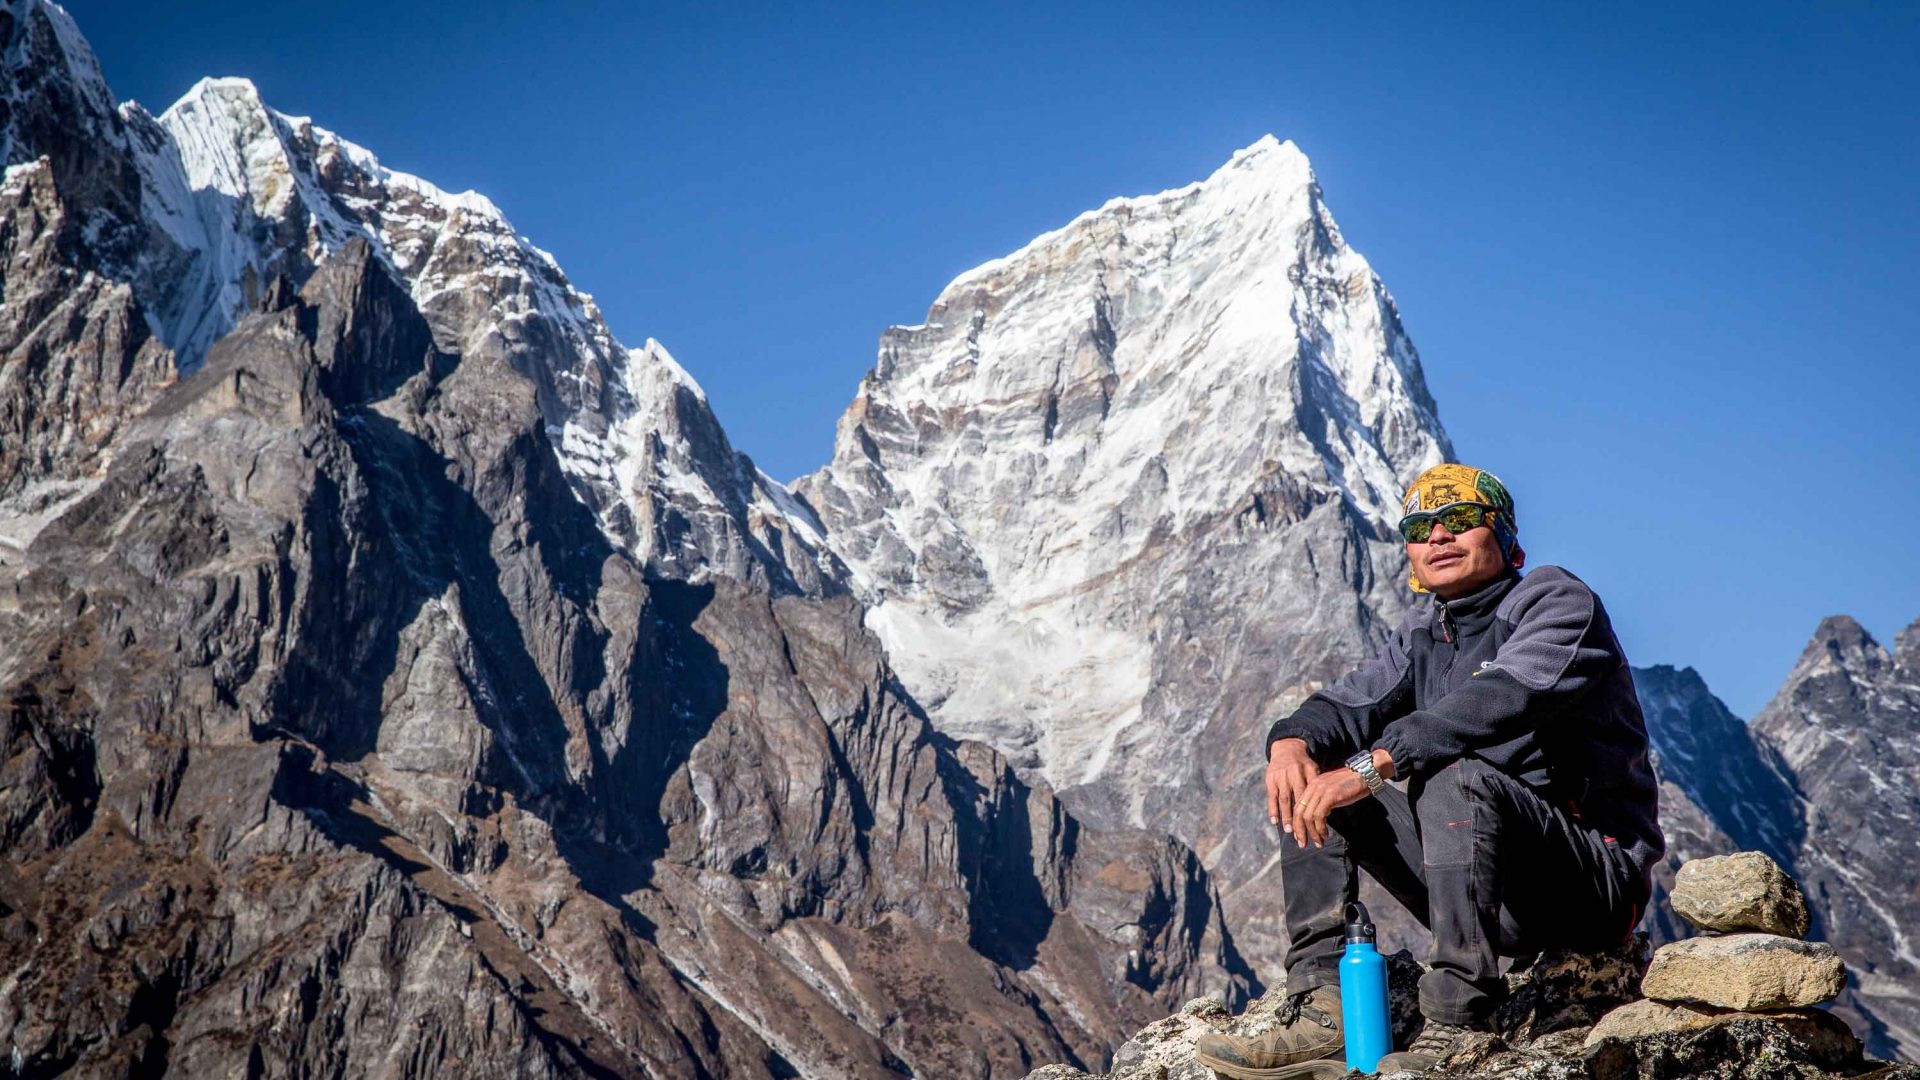 A porter relaxes and enjoys the view during the Everest Base Camp trek.